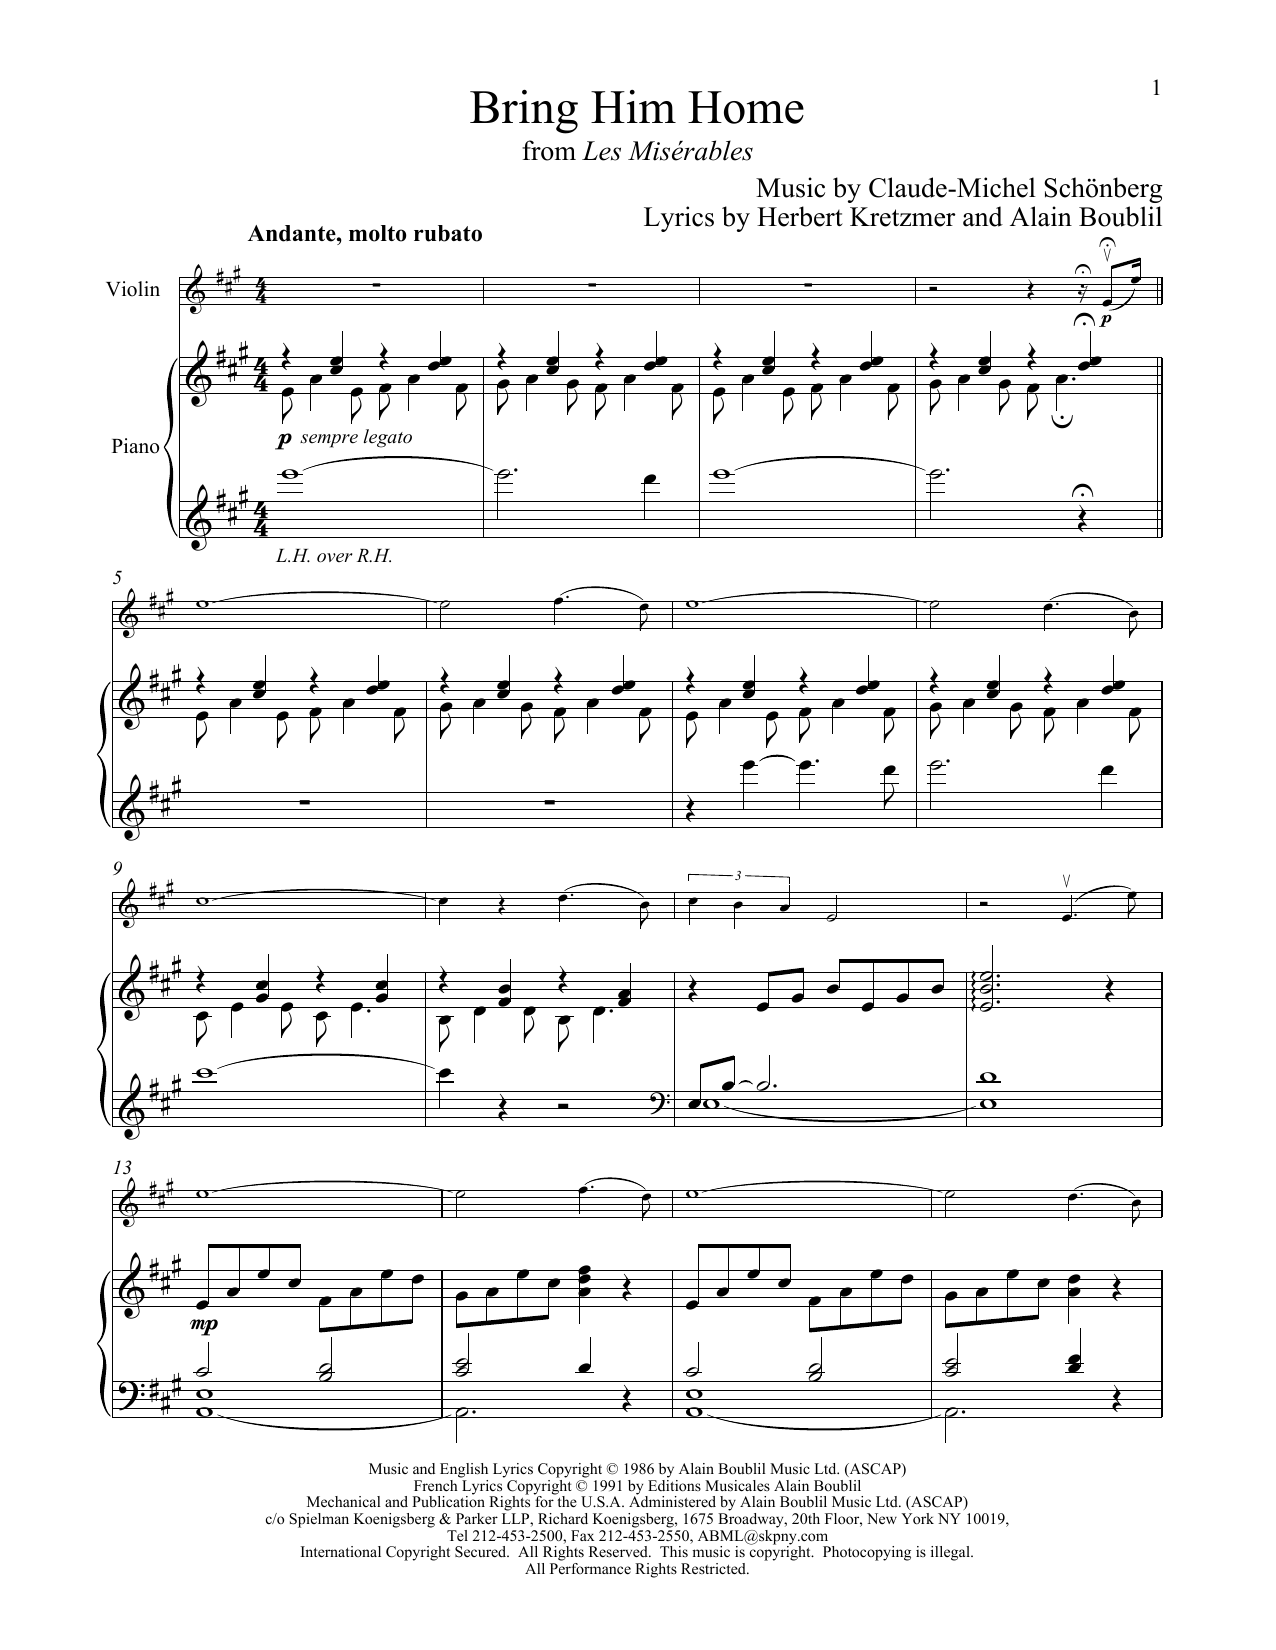 Download Claude-Michel Schonberg Bring Him Home (from Les Miserables) Sheet Music